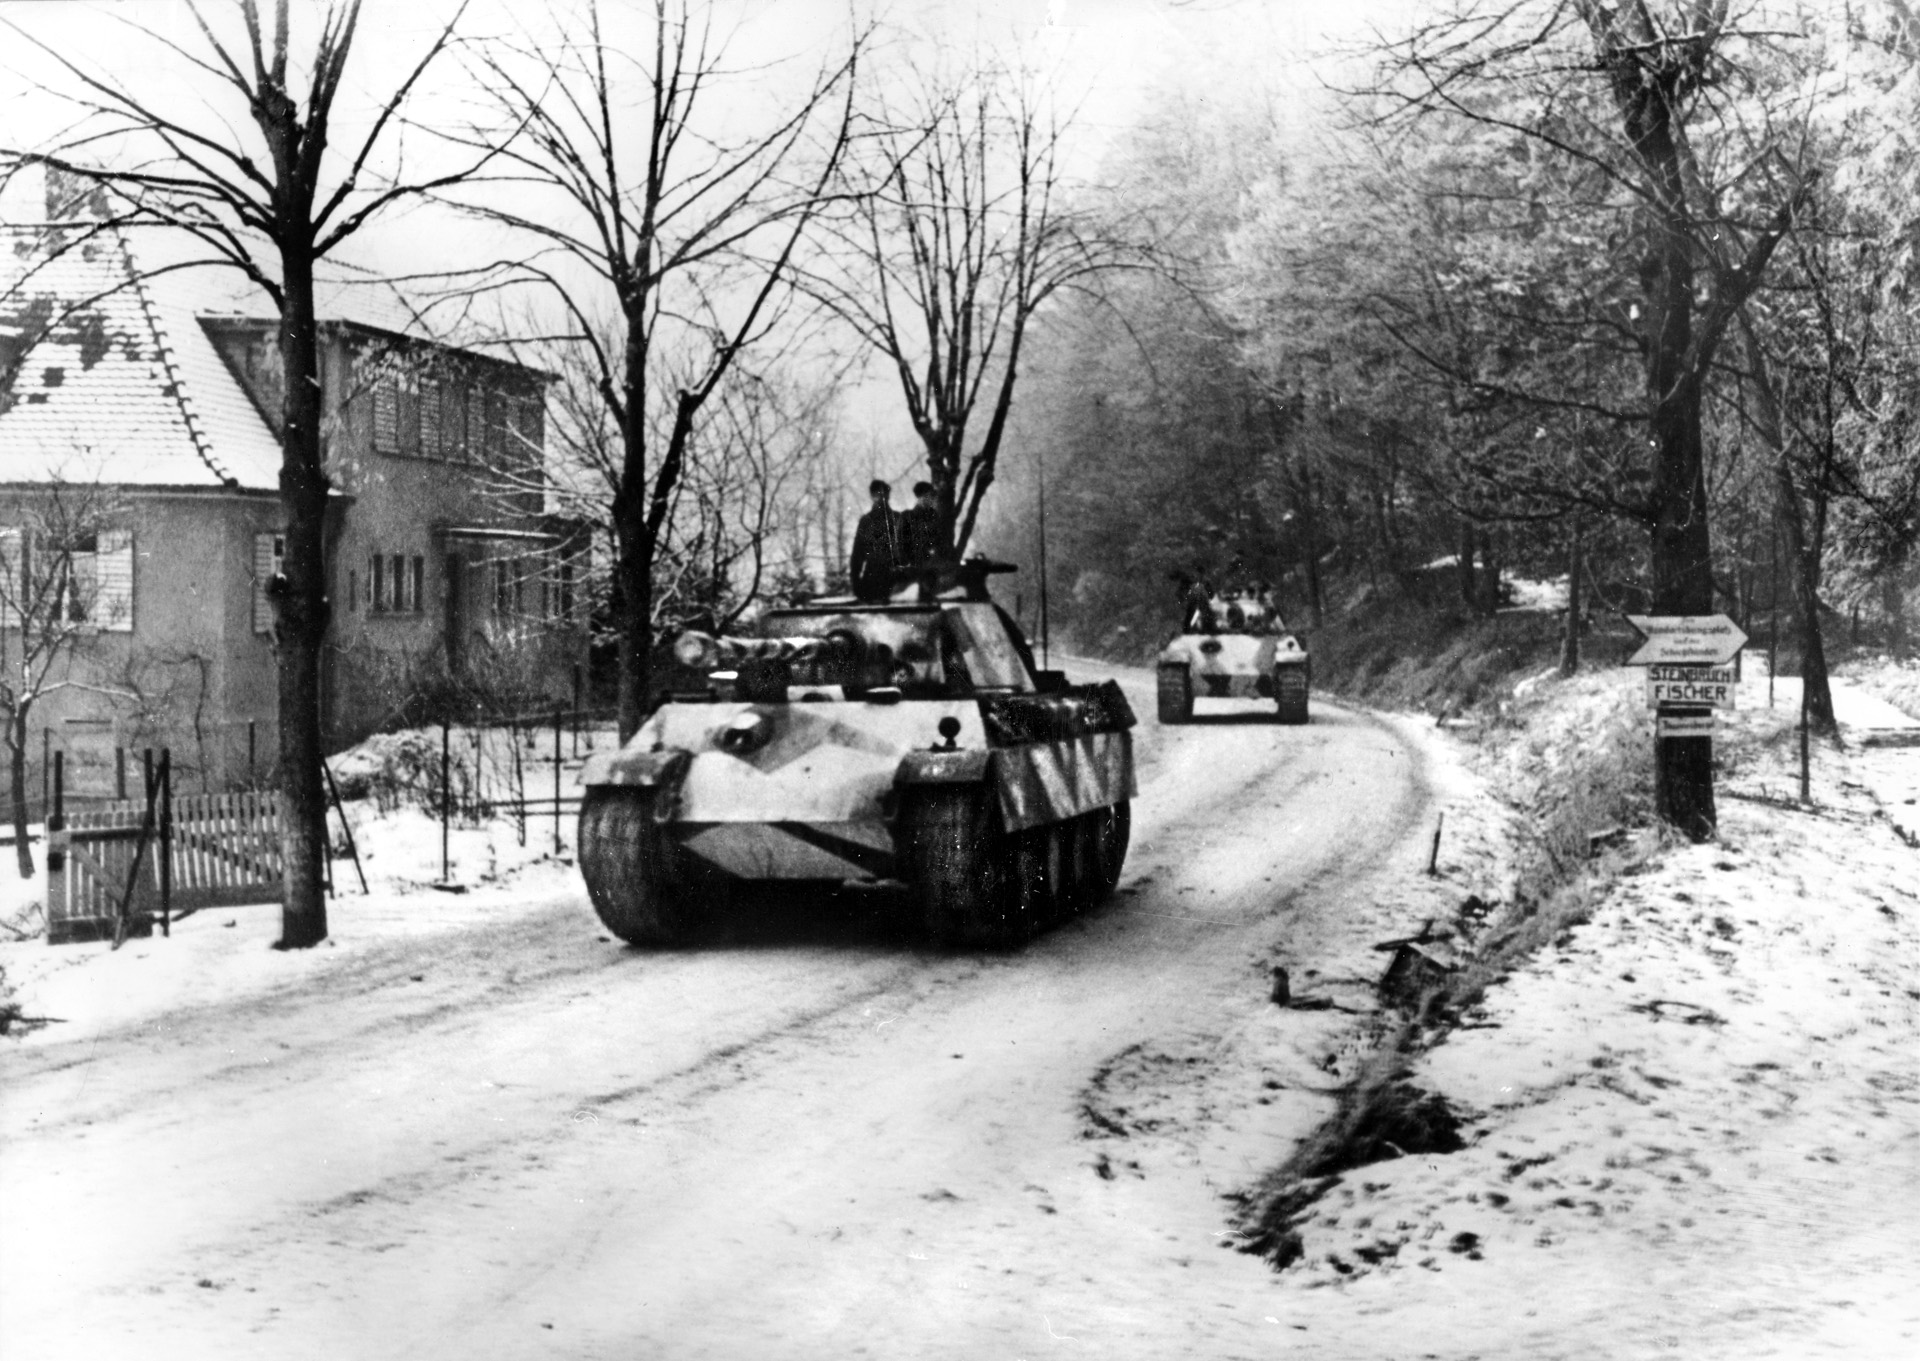 Hitler’s 1944-45 winter counteroffensive caught the U.S. command totally off guard and permitted German forces to crash through American lines along the German border with Belgium, Luxembourg, and northeast France. Thousands of U.S. troops were killed or taken prisoner. Here, German armor drives through the snow-covered Hagenauer Forest in the lower Vosges Mountain, January 3, 1945.